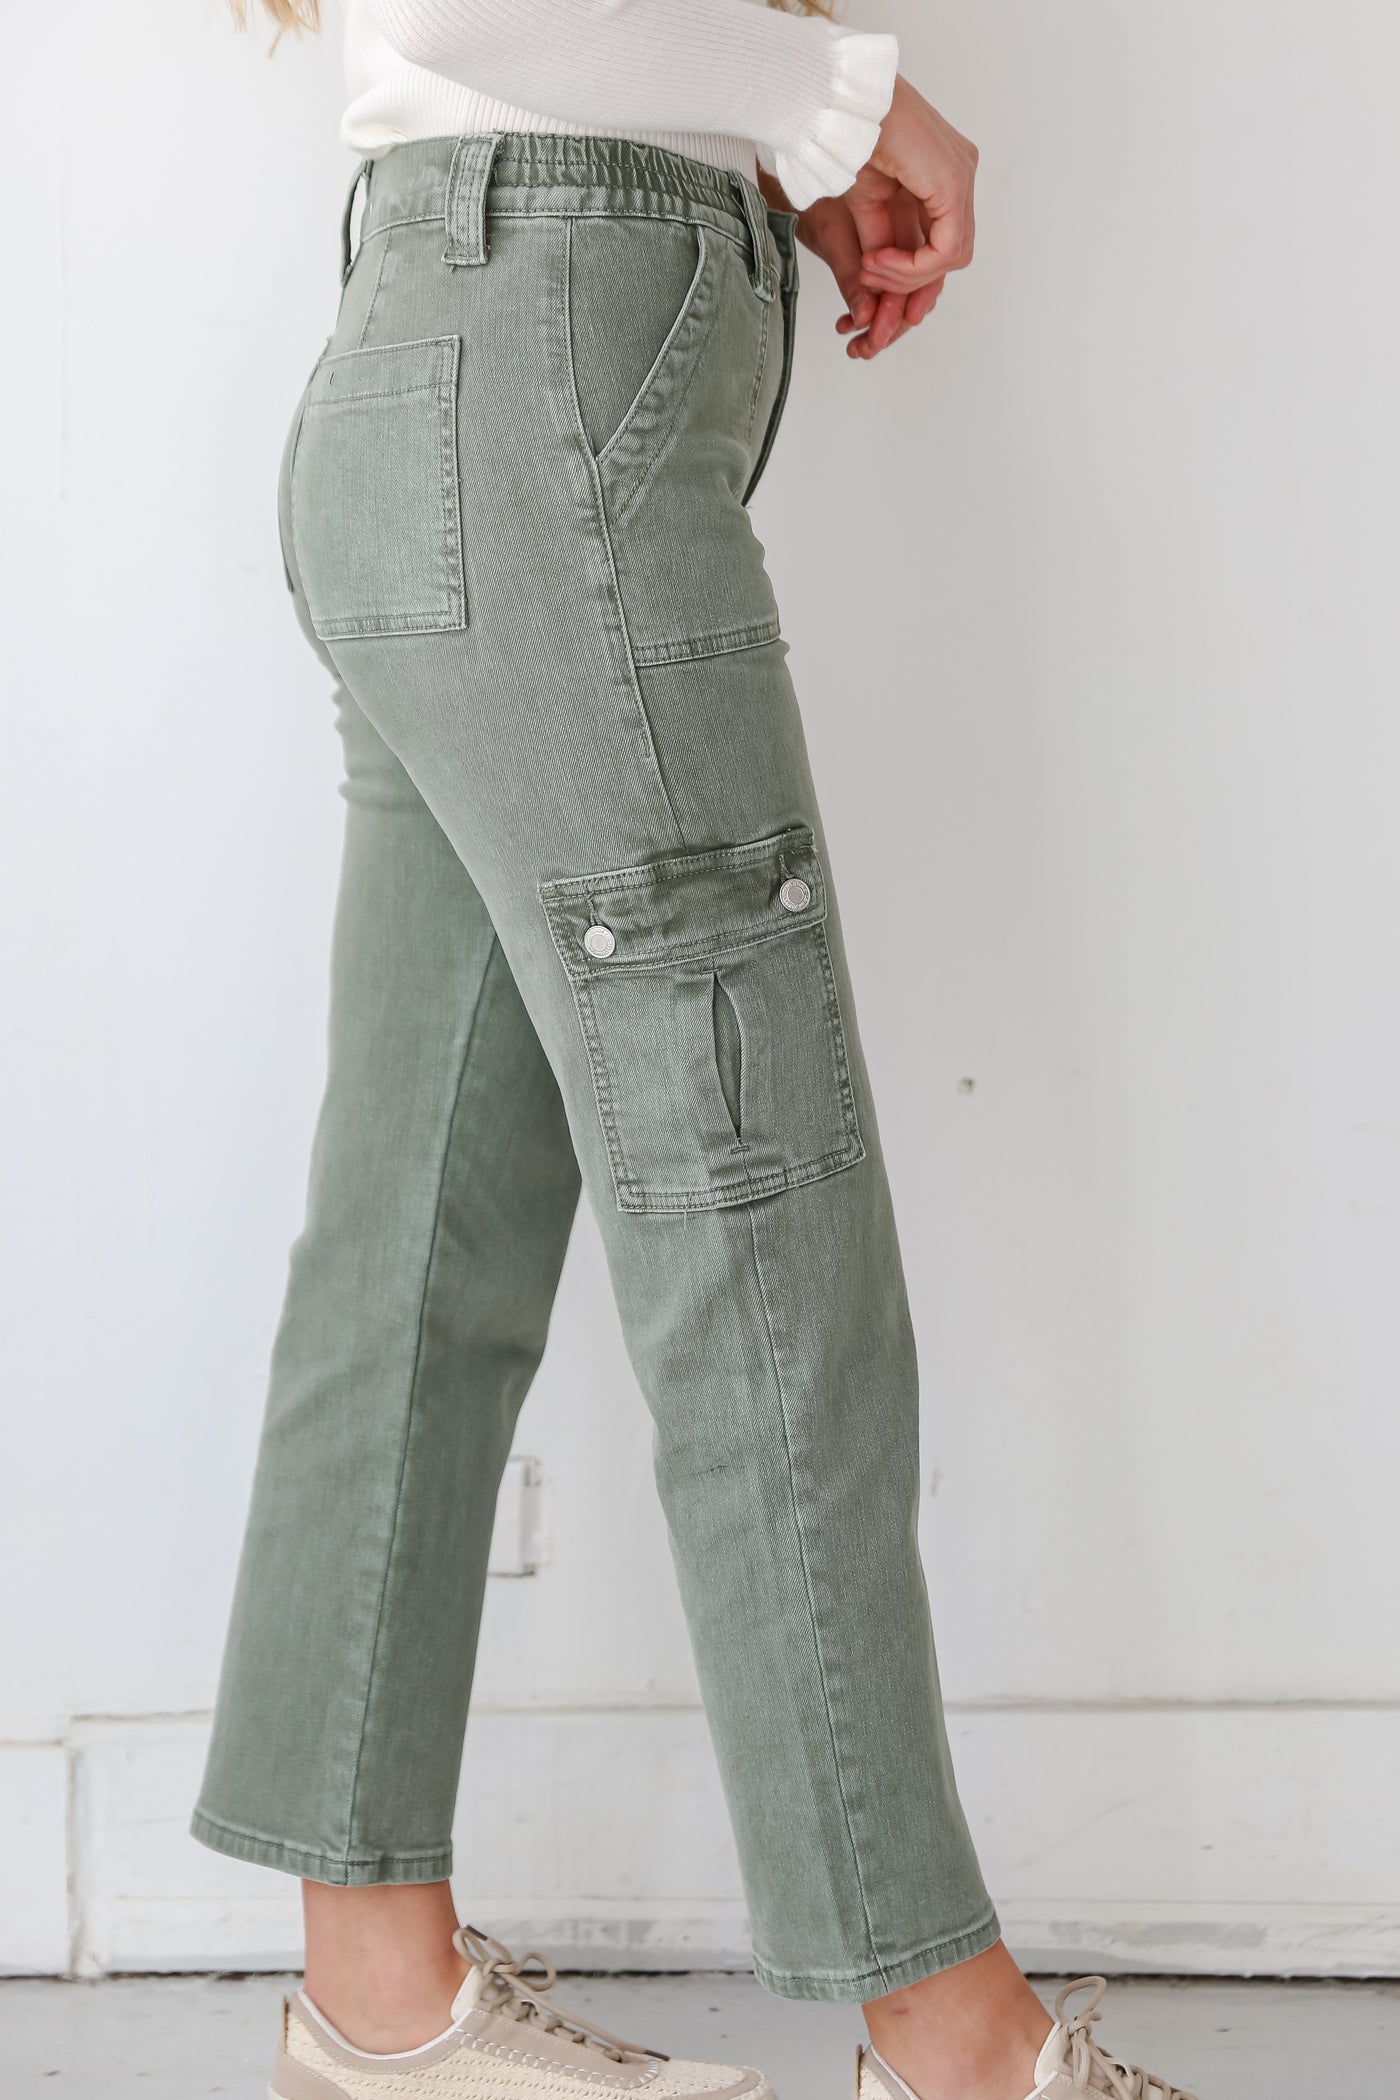 Army Green Utility Cargo Jeans for women